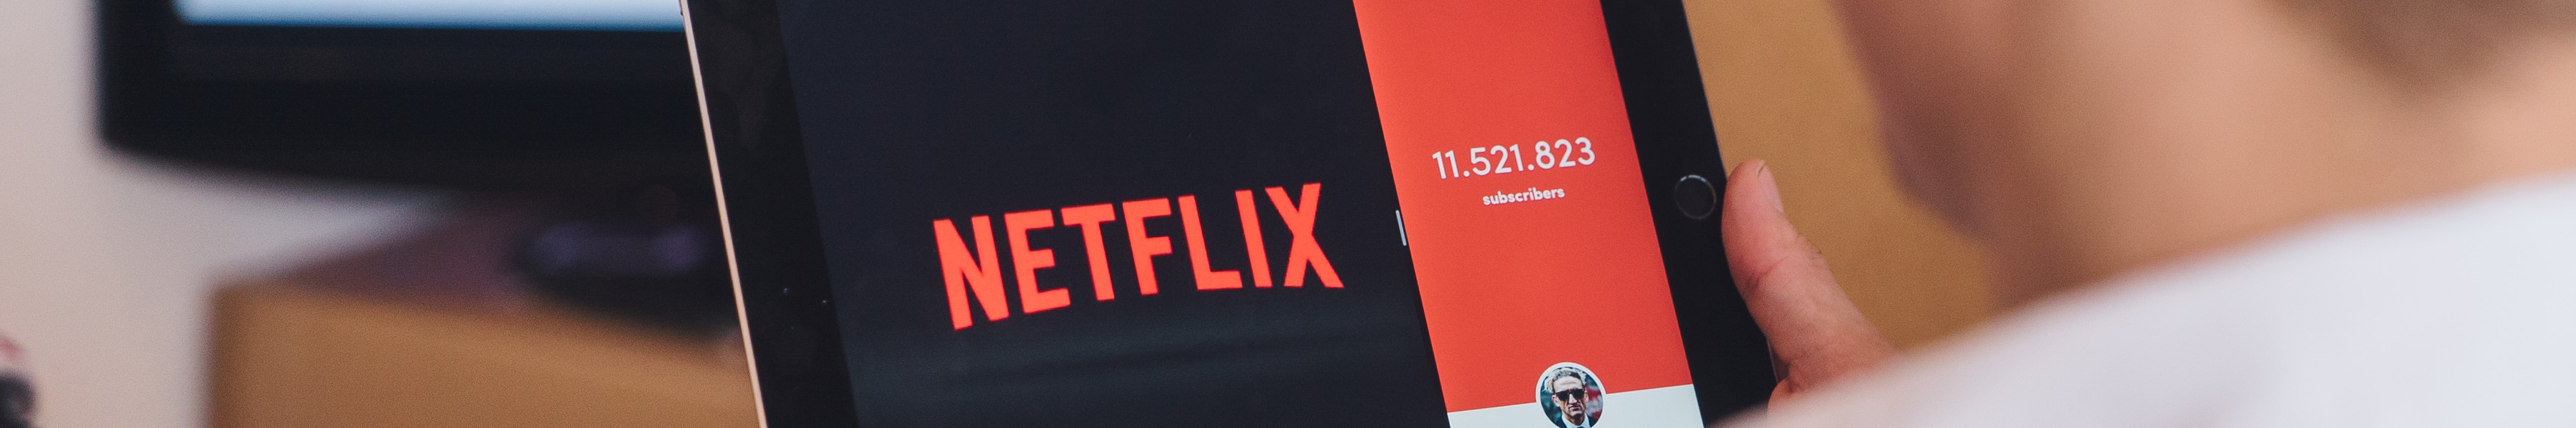 Netflix is including women in its workforce, although is yet to report its gender pay gap